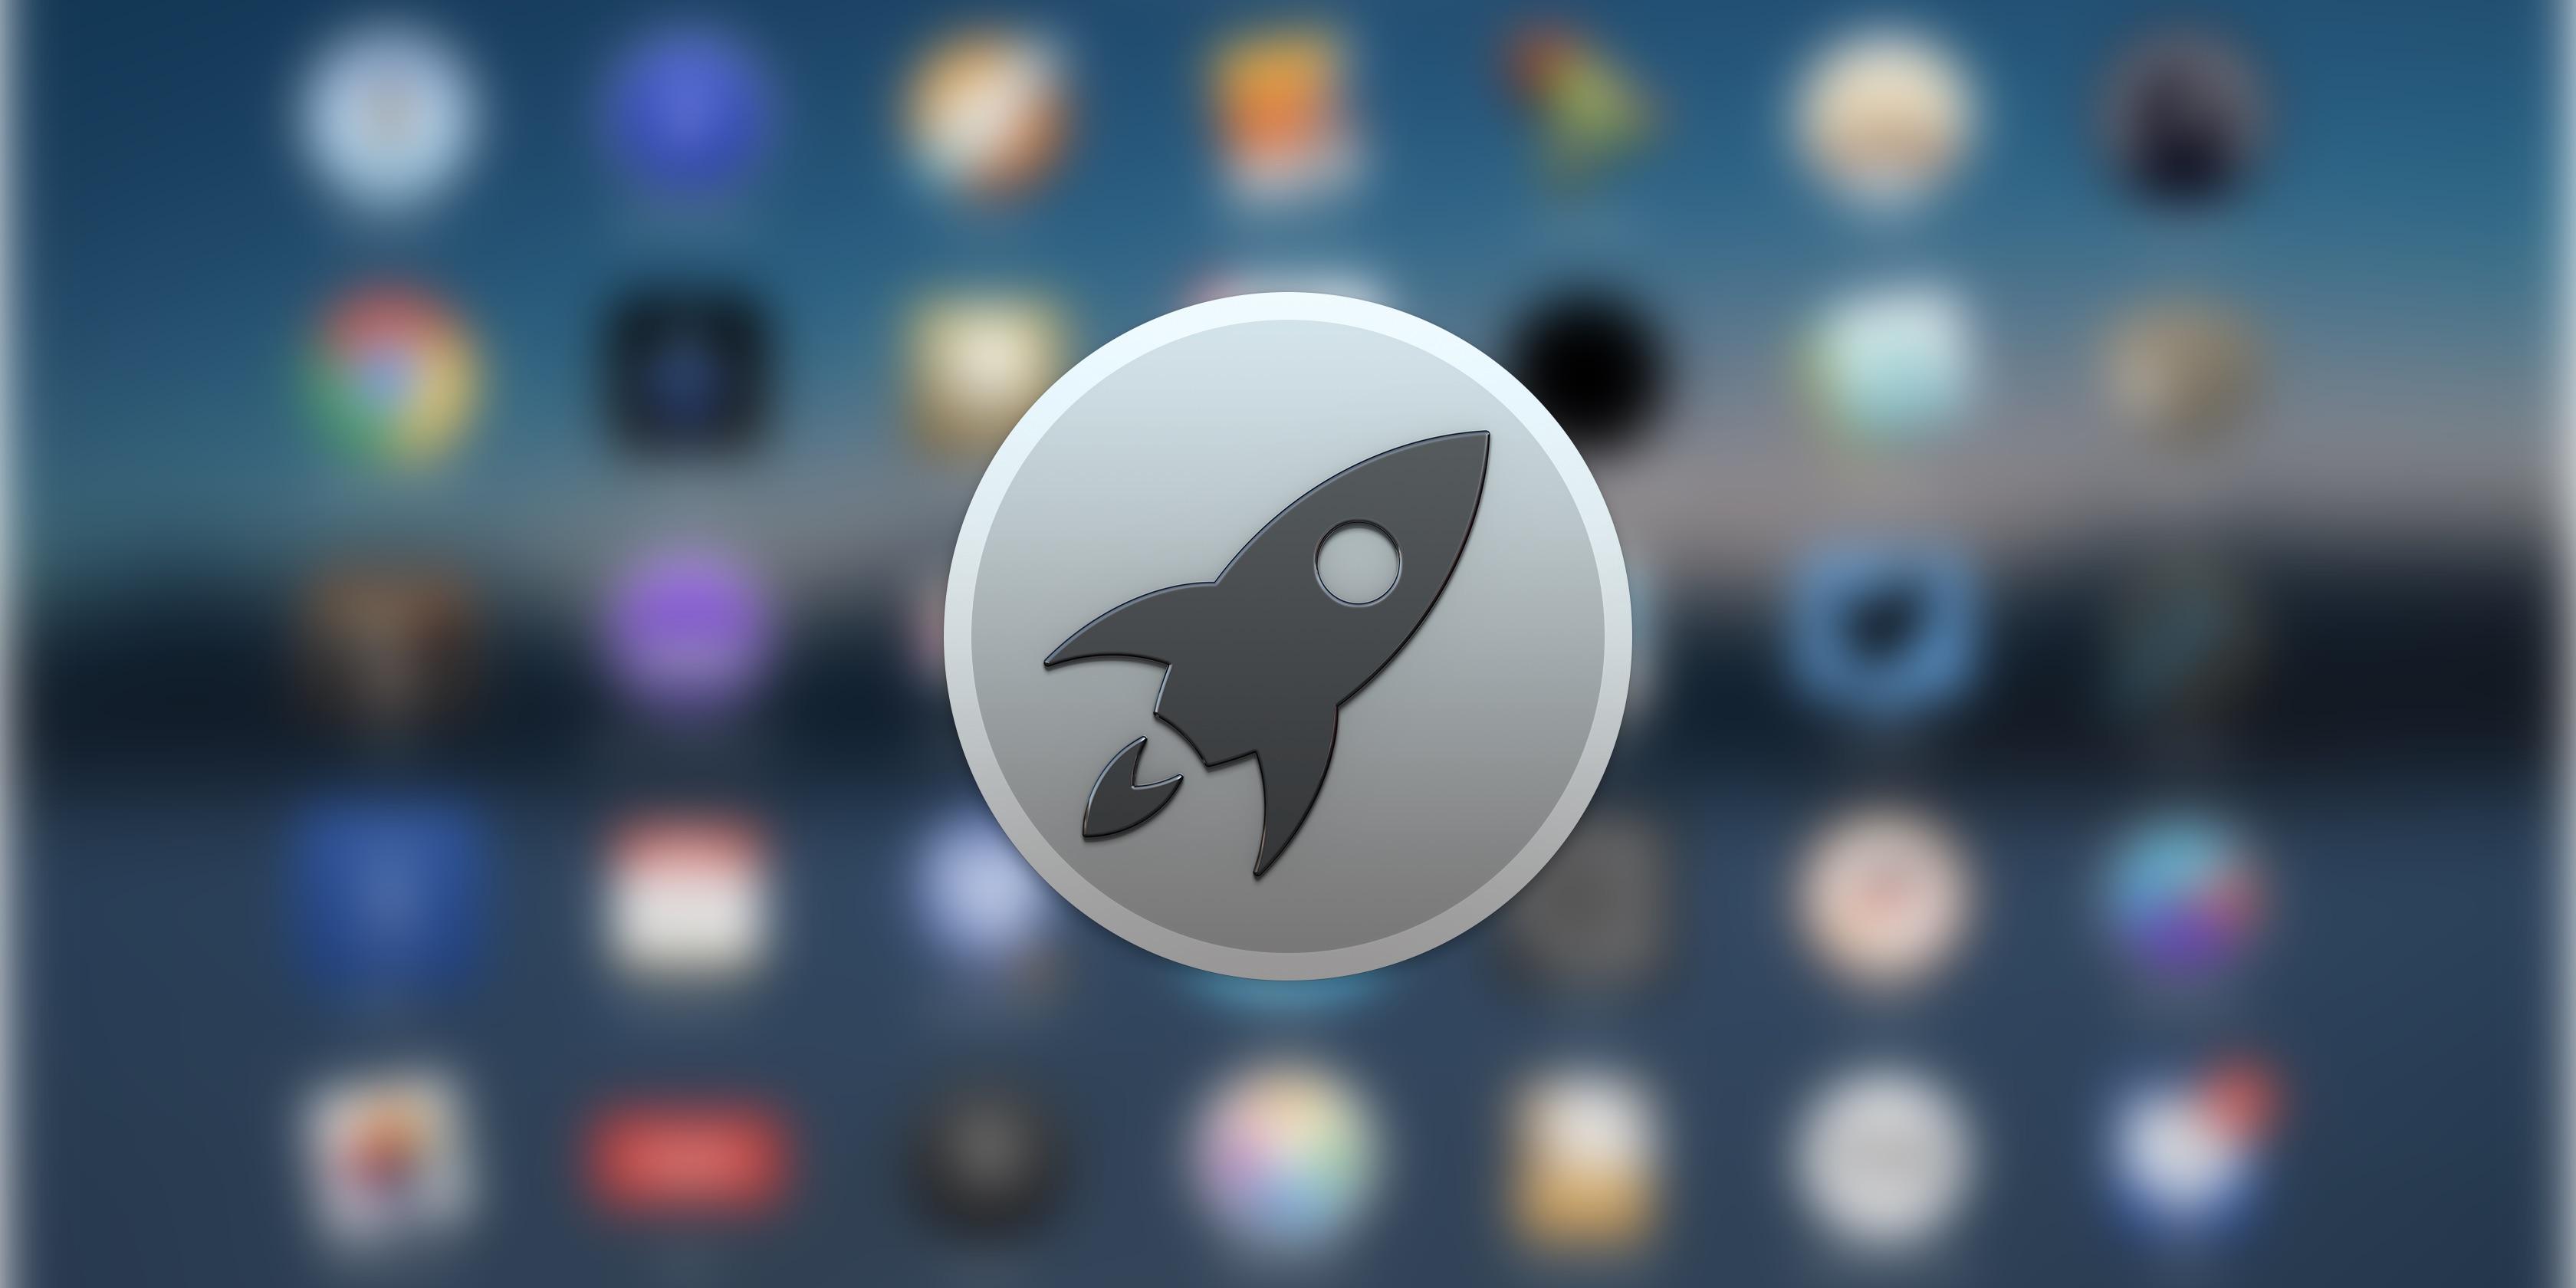 launchpad for mac download